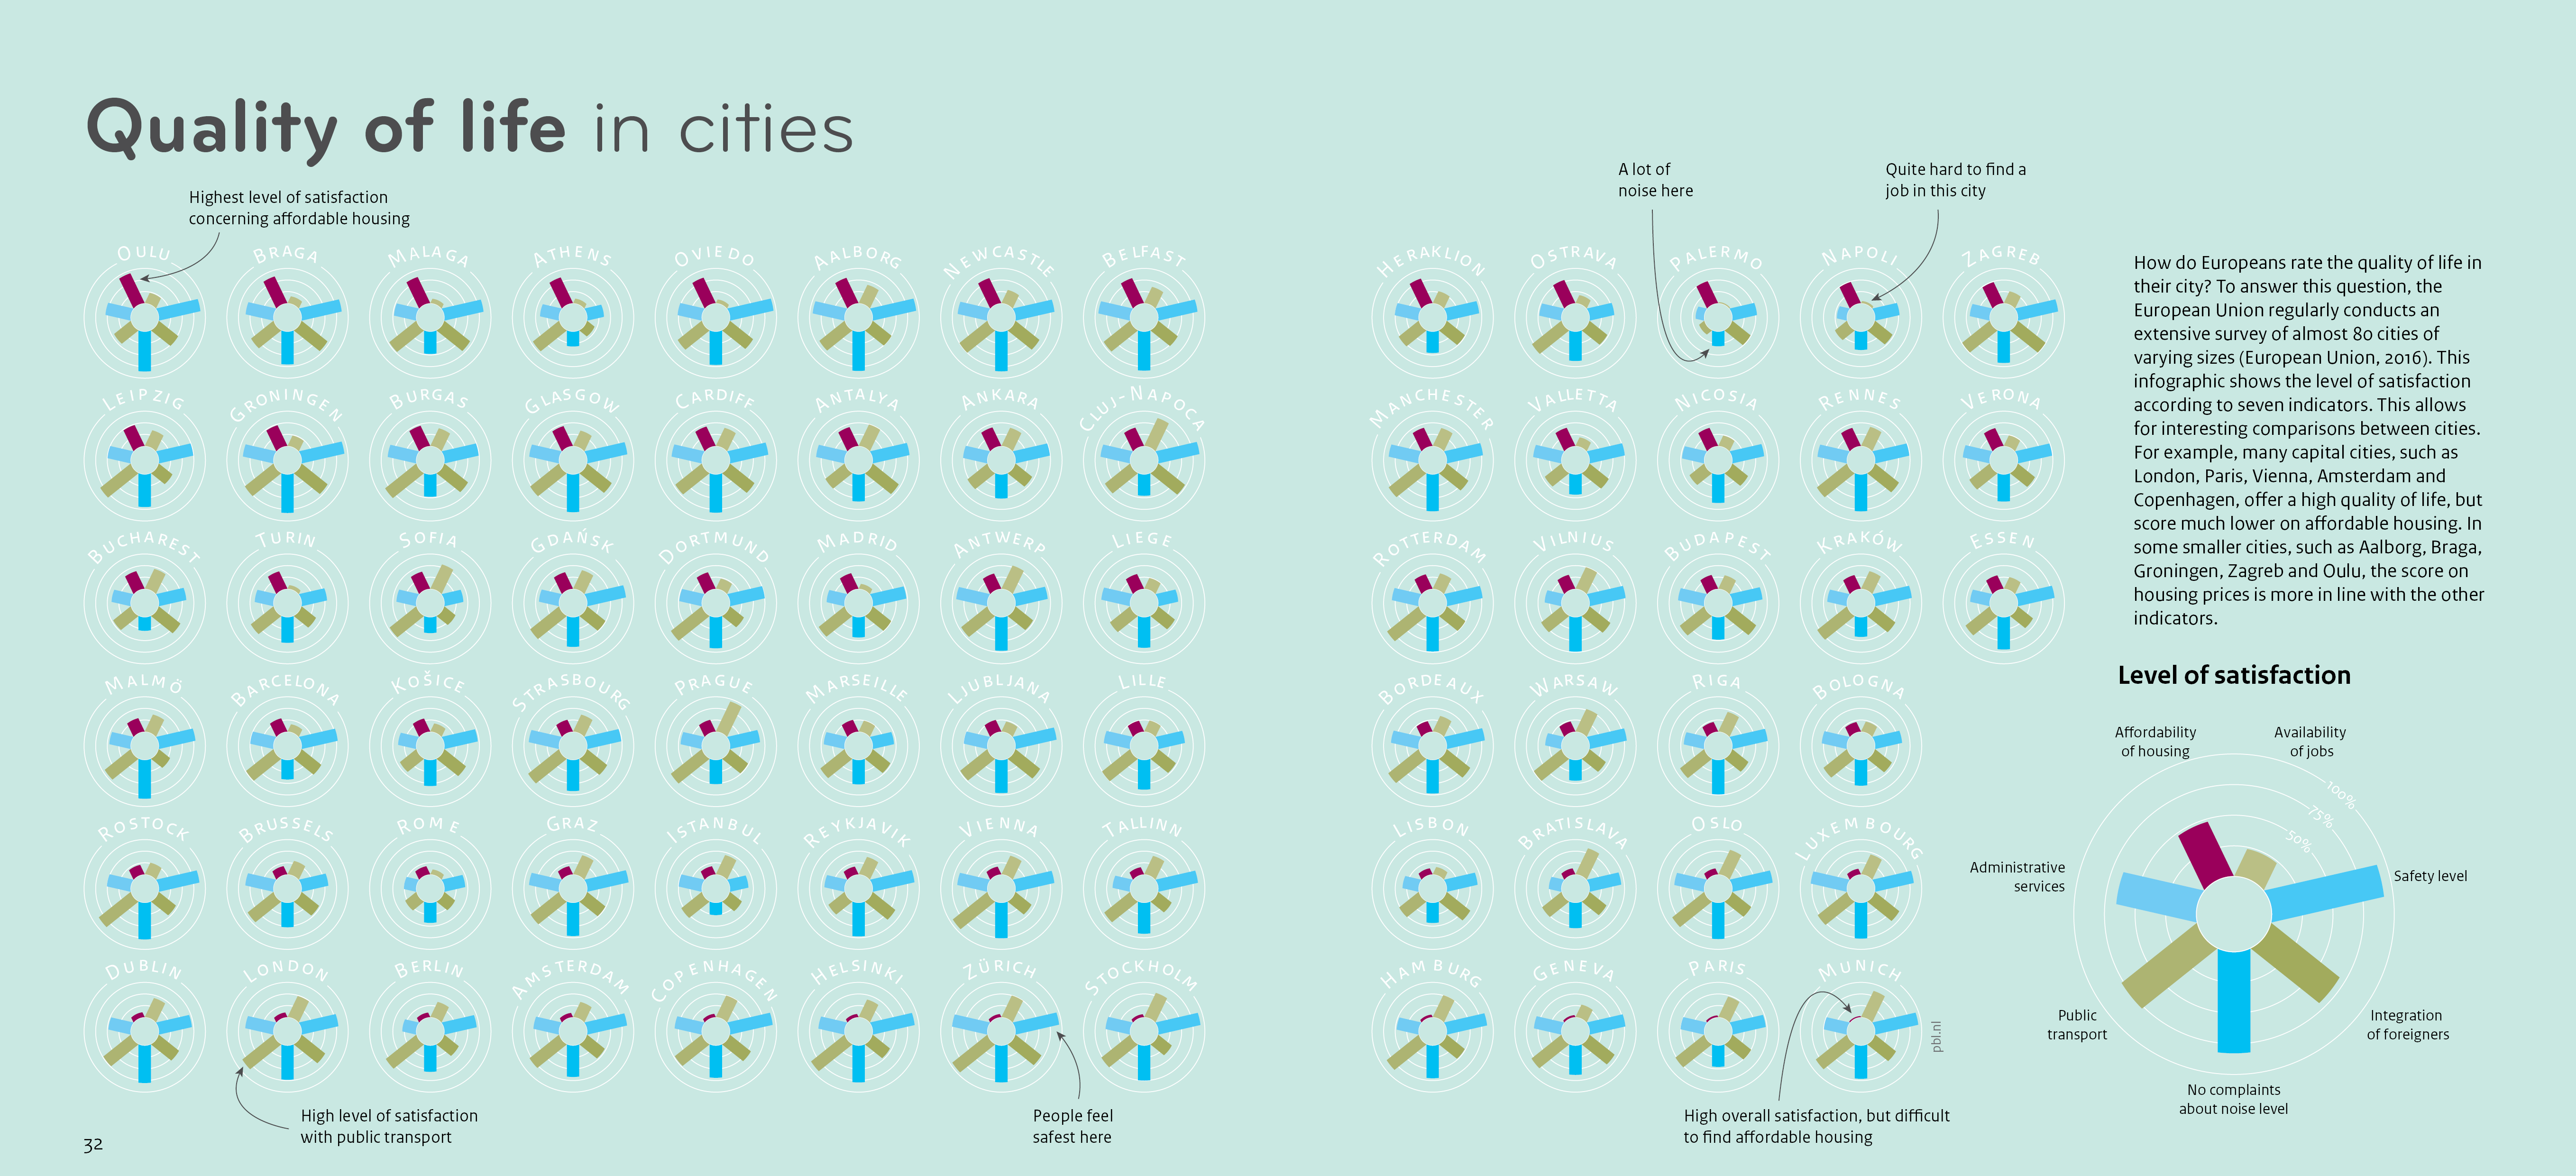 This infographic shows the level of satisfaction, according to seven indicators, for 75 European cities.